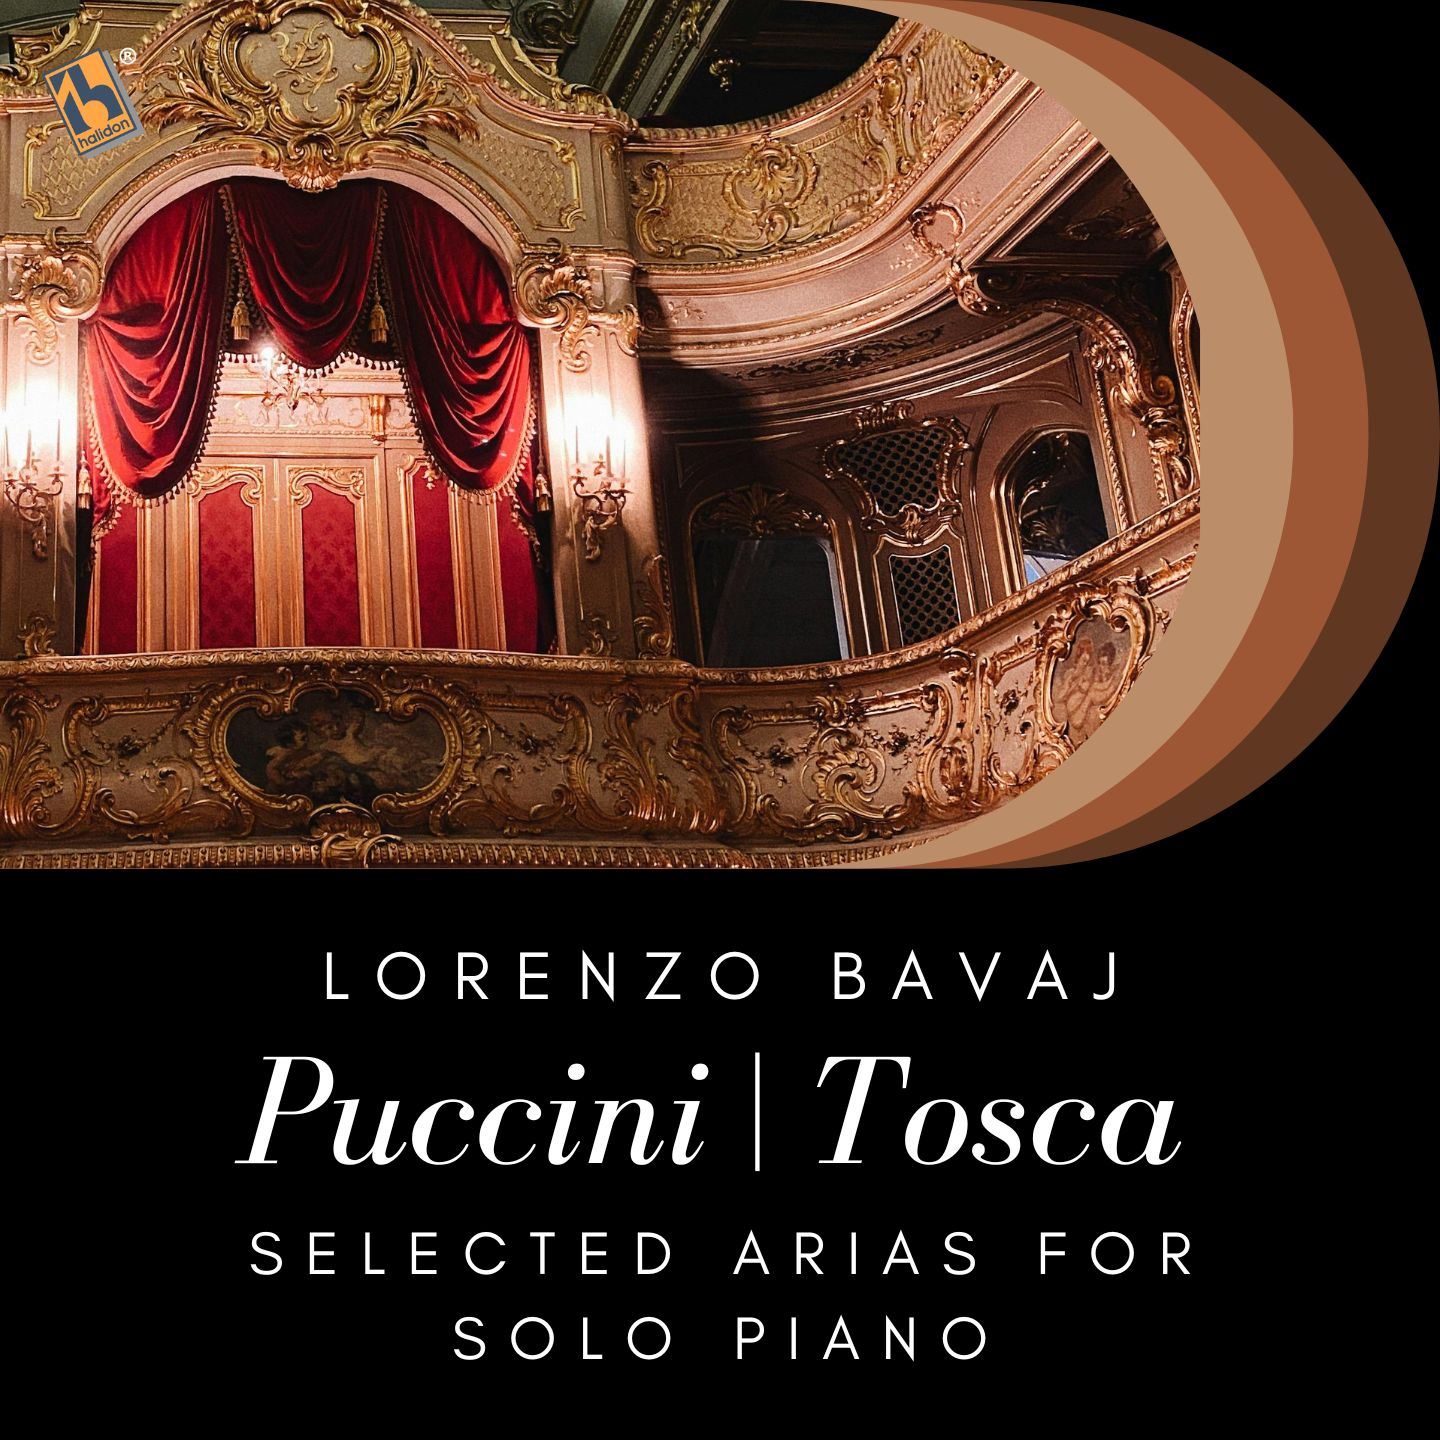 Puccini: Tosca, SC 69 (Selected Arias for Solo Piano)